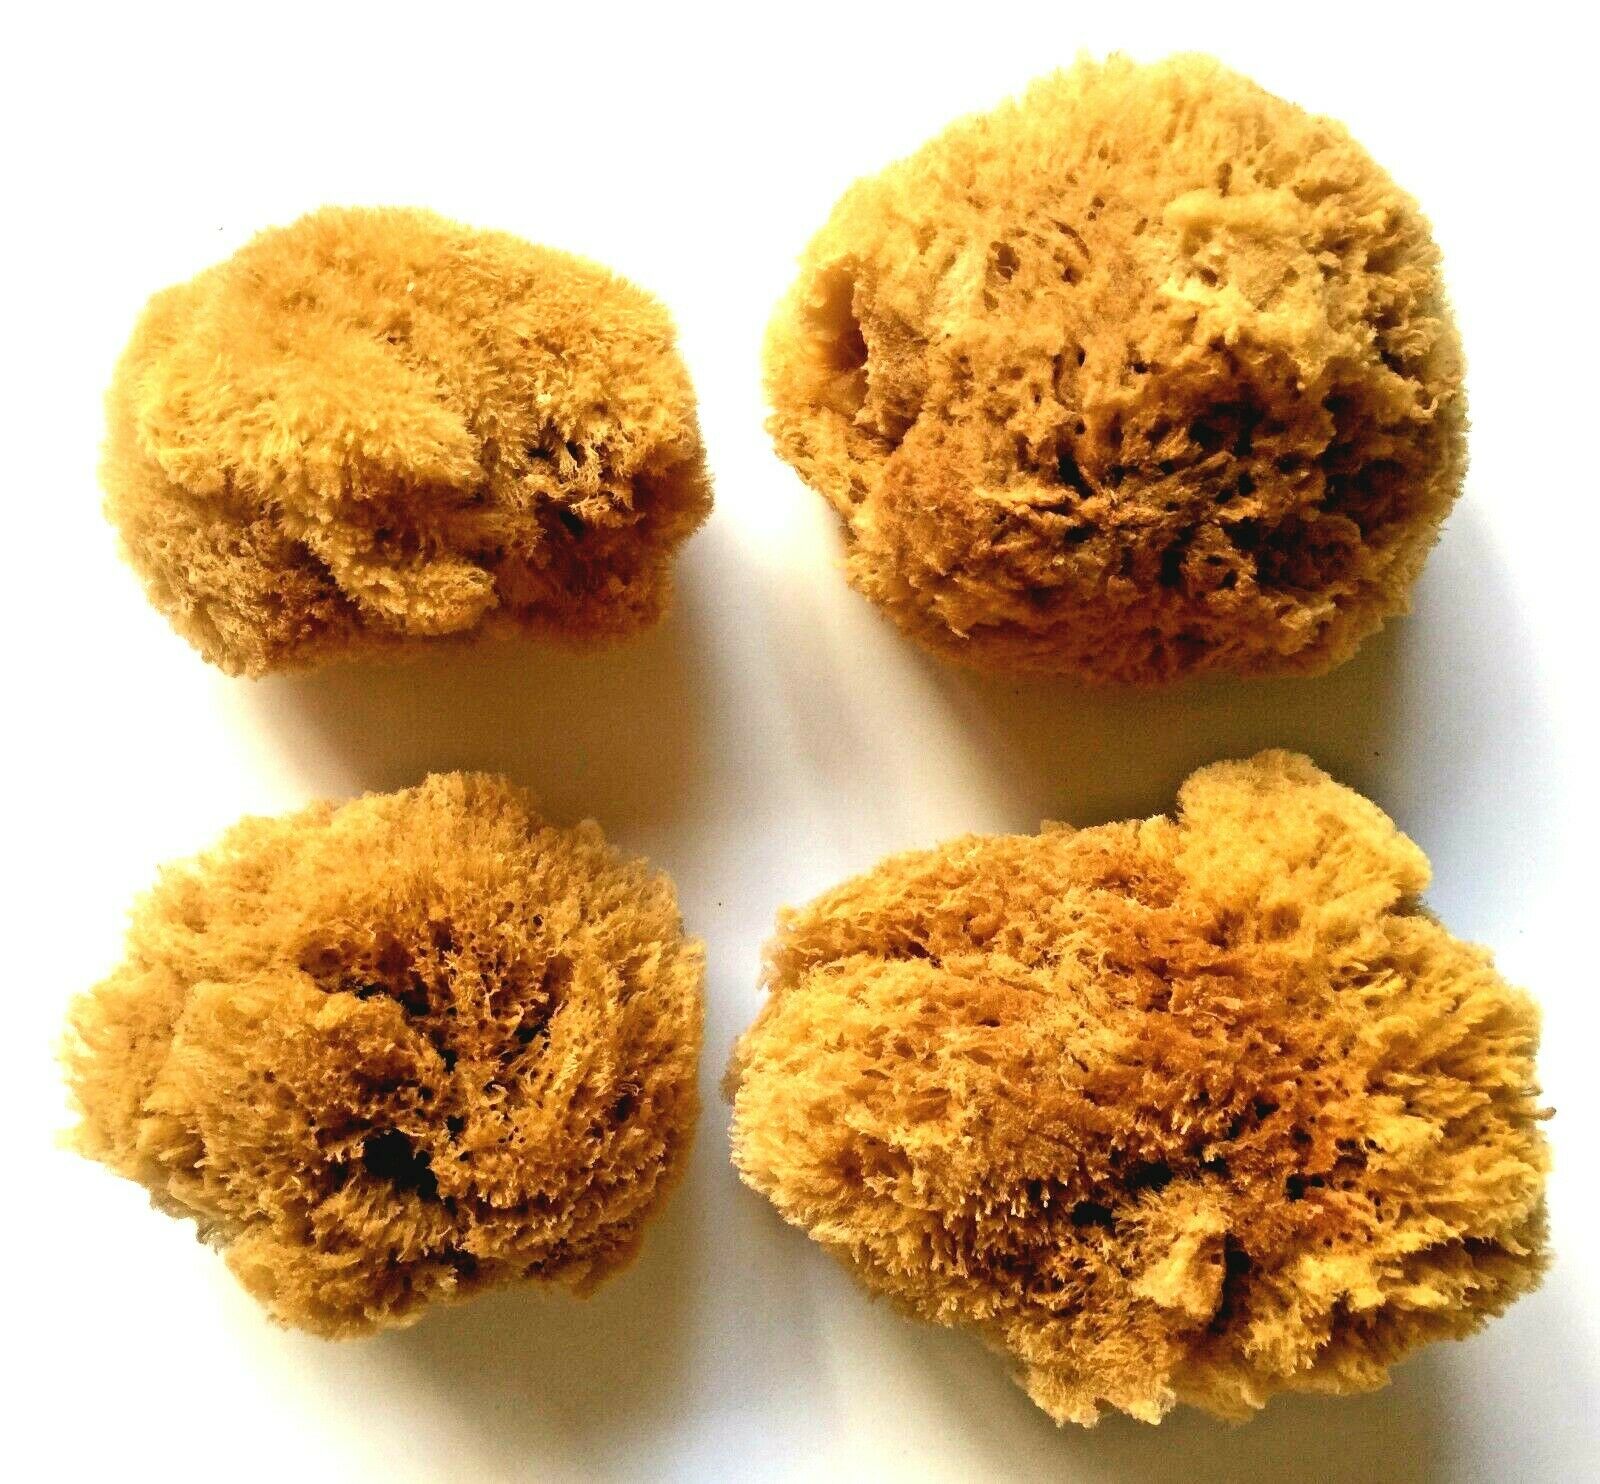 Lot Of 4 Natural Painting Sea Sponge 4"-5" And 5"-6" Size For Artists, Crafts,